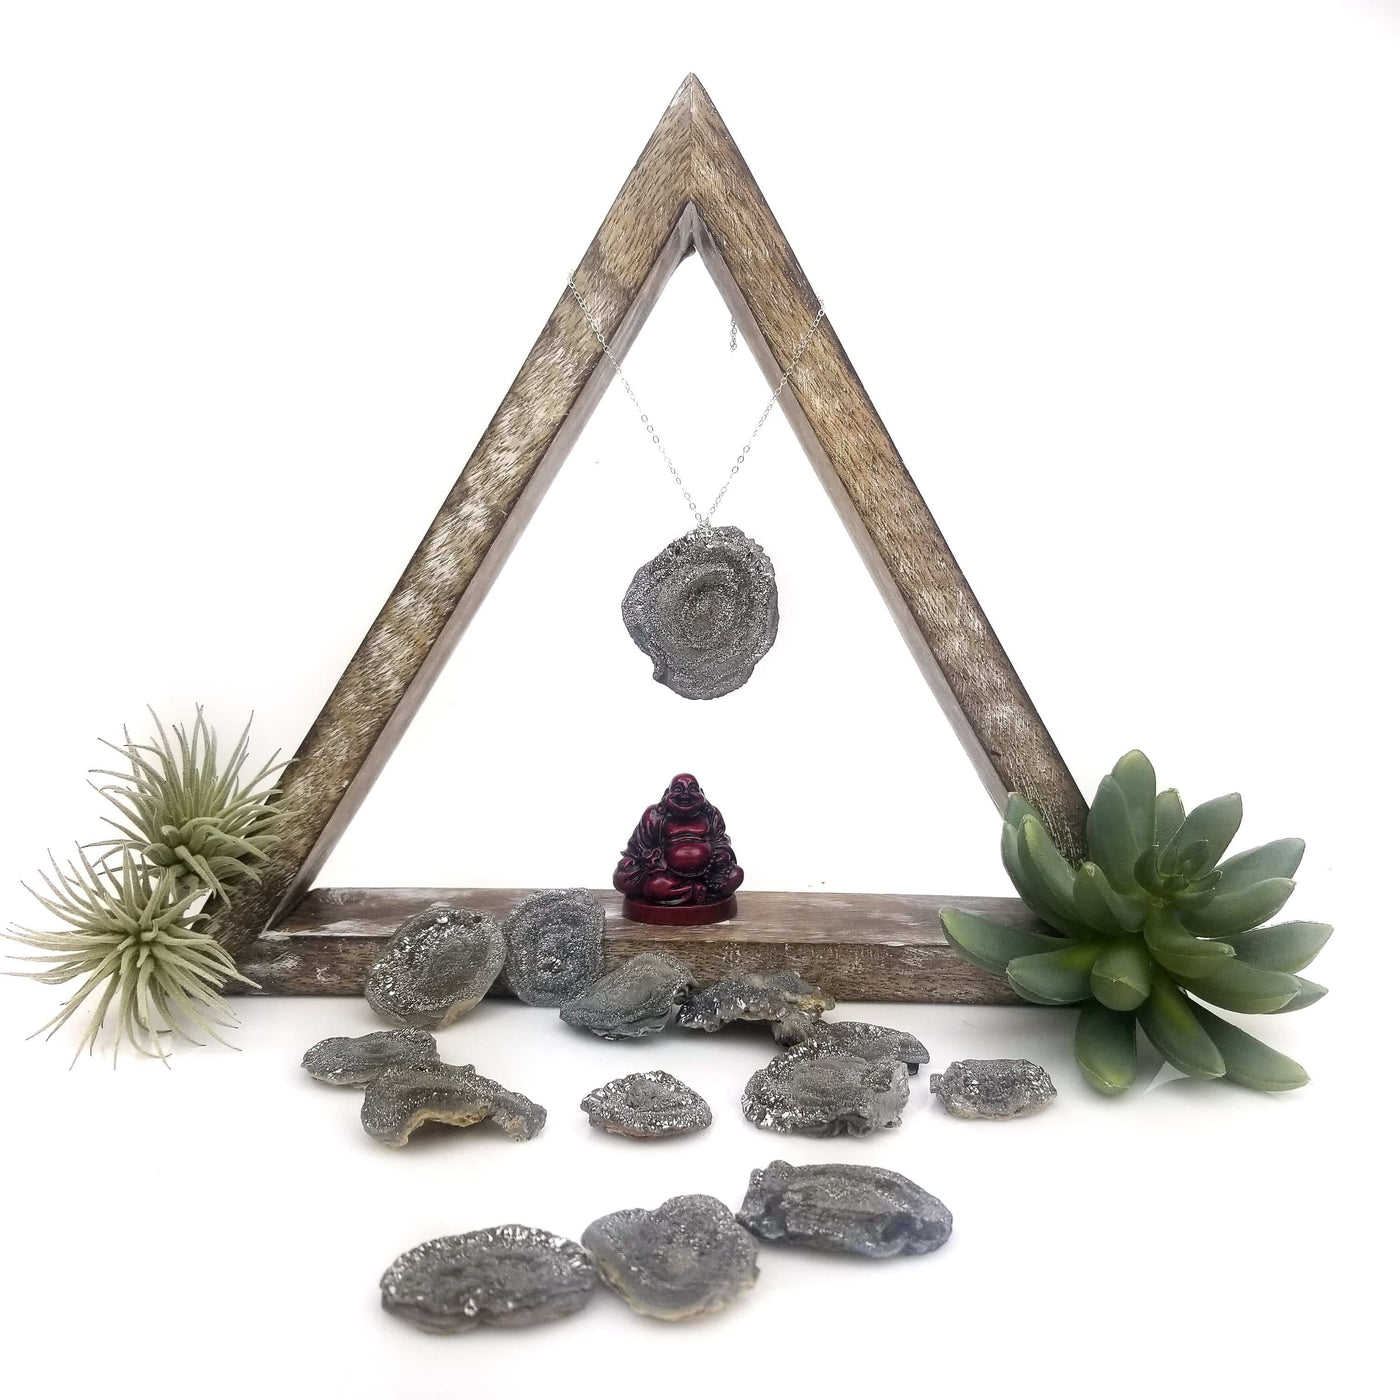 1 Raw Chalcedony Freeform bead on necklace chain hanging on triangular display with other stones on the white table